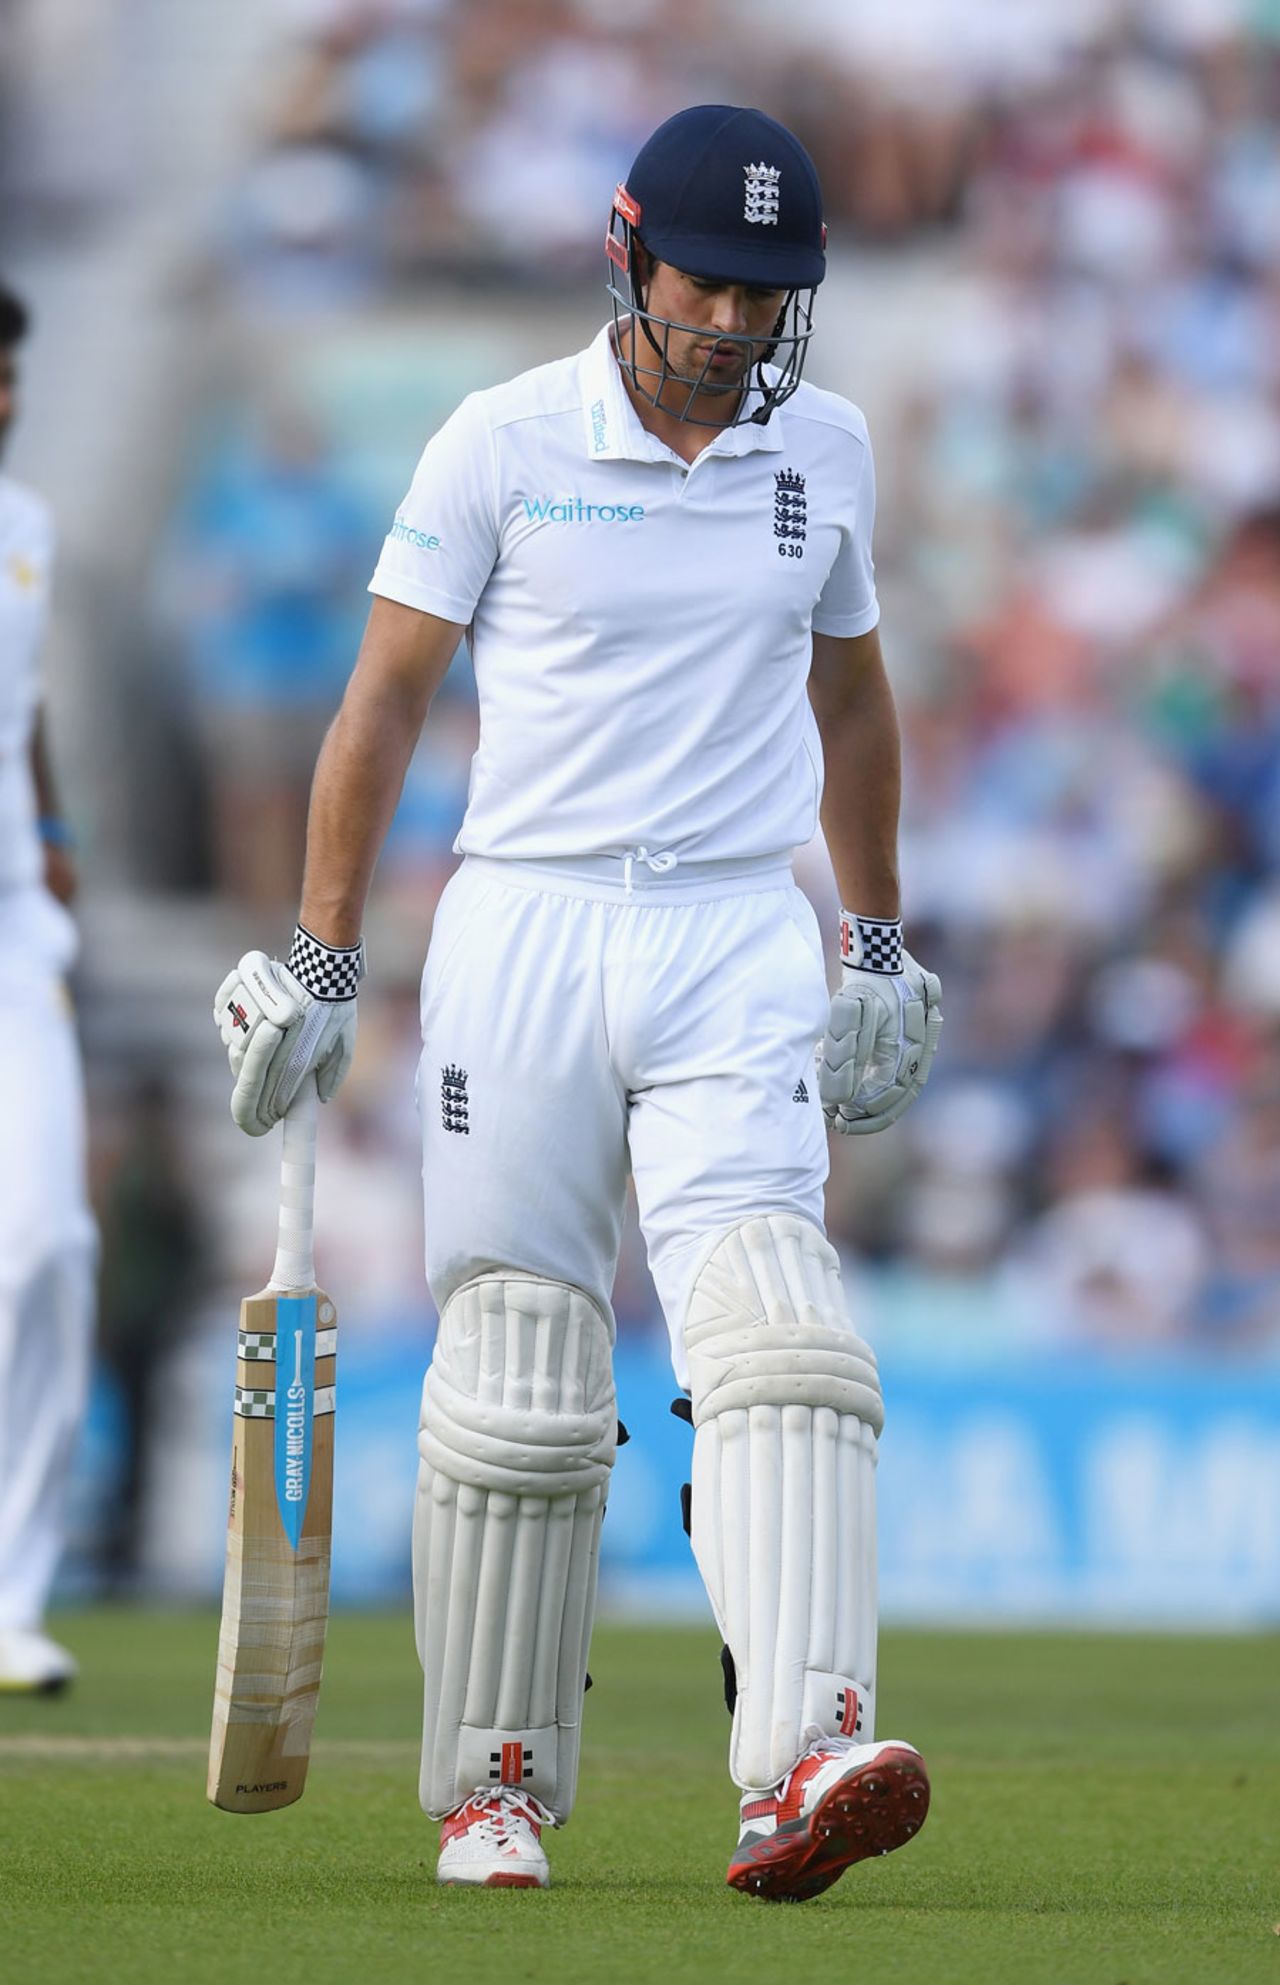 Alastair Cook was caught at slip for 7, England v Pakistan, 4th Test, The Oval, 3rd day, August 13, 2016